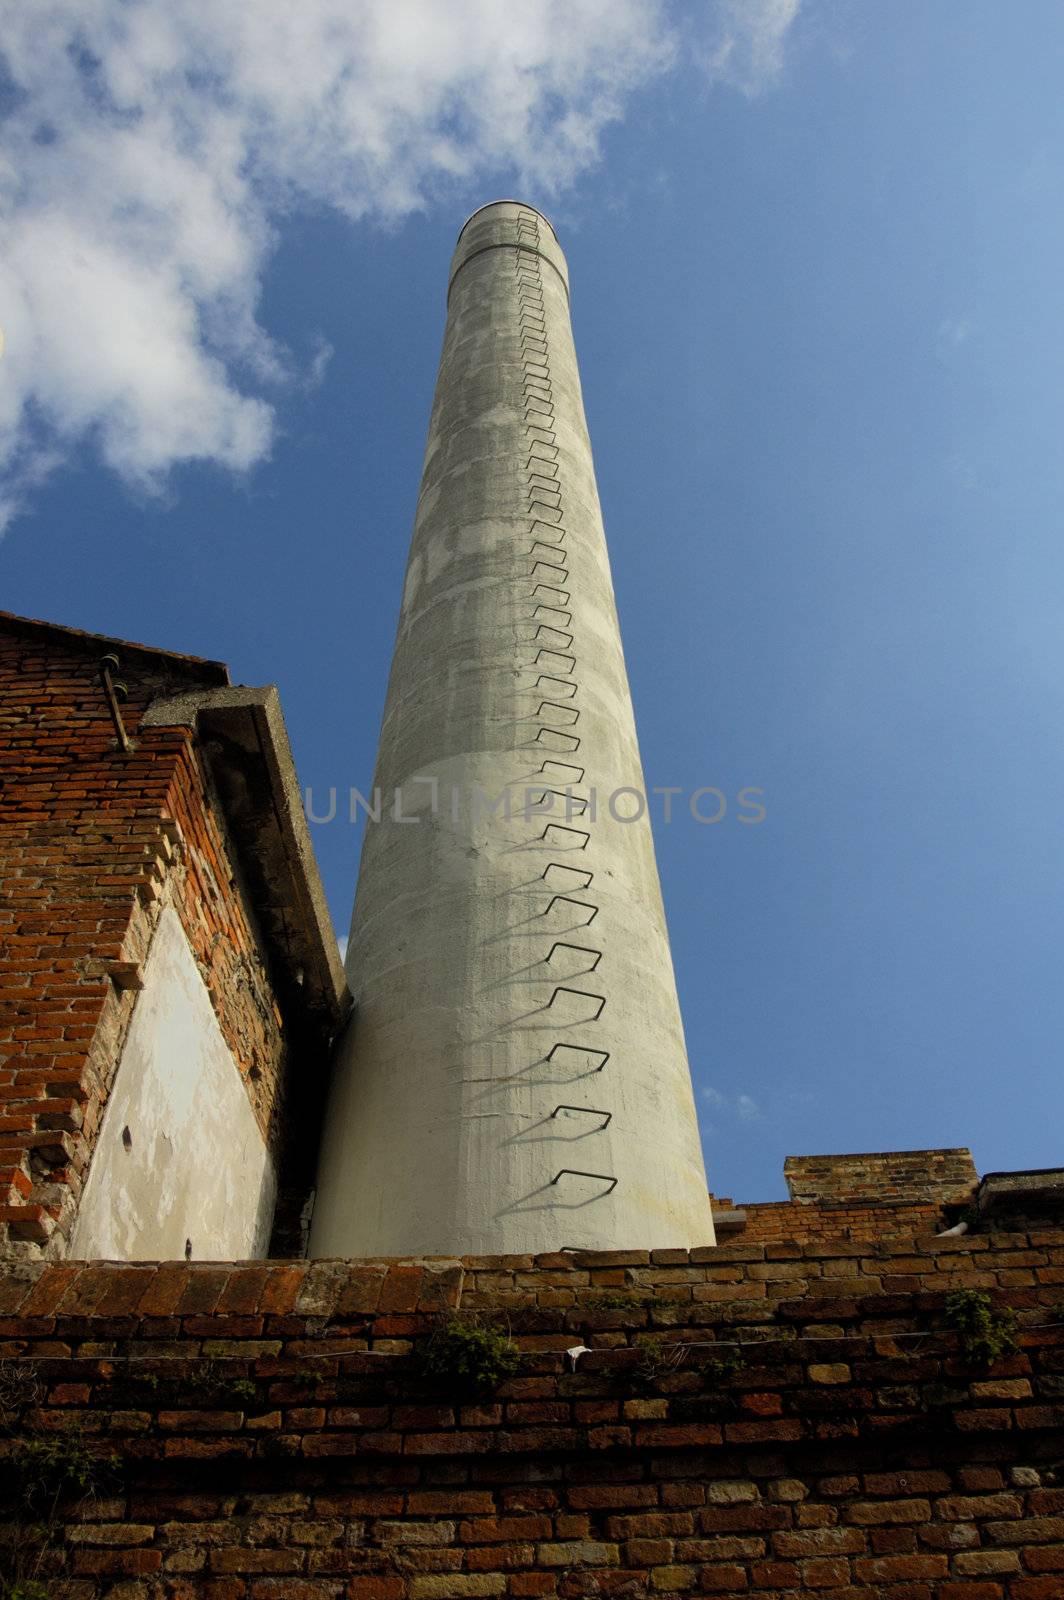 A factory chimney on the Venetian island of Murano, where glass is made.